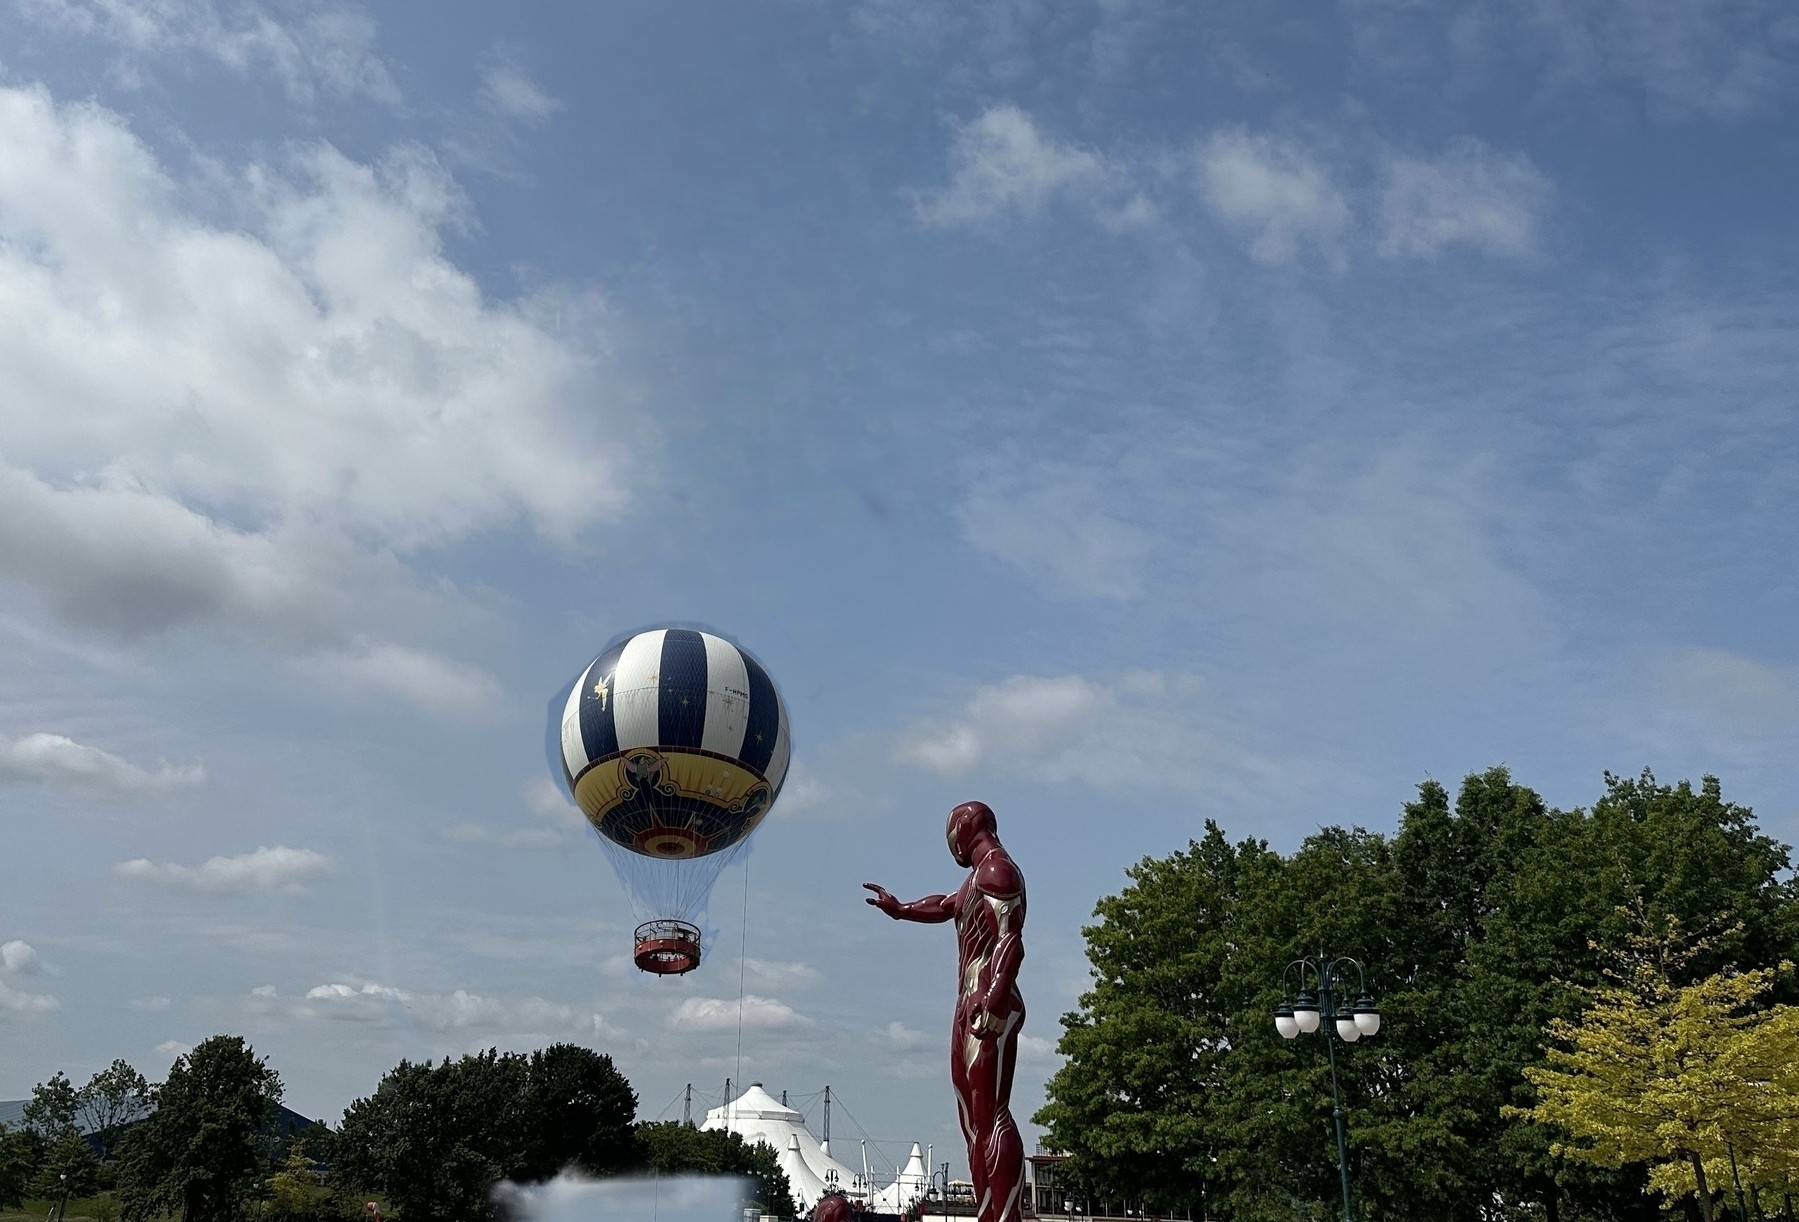 Large Iron Man statue with hot air balloon in background.